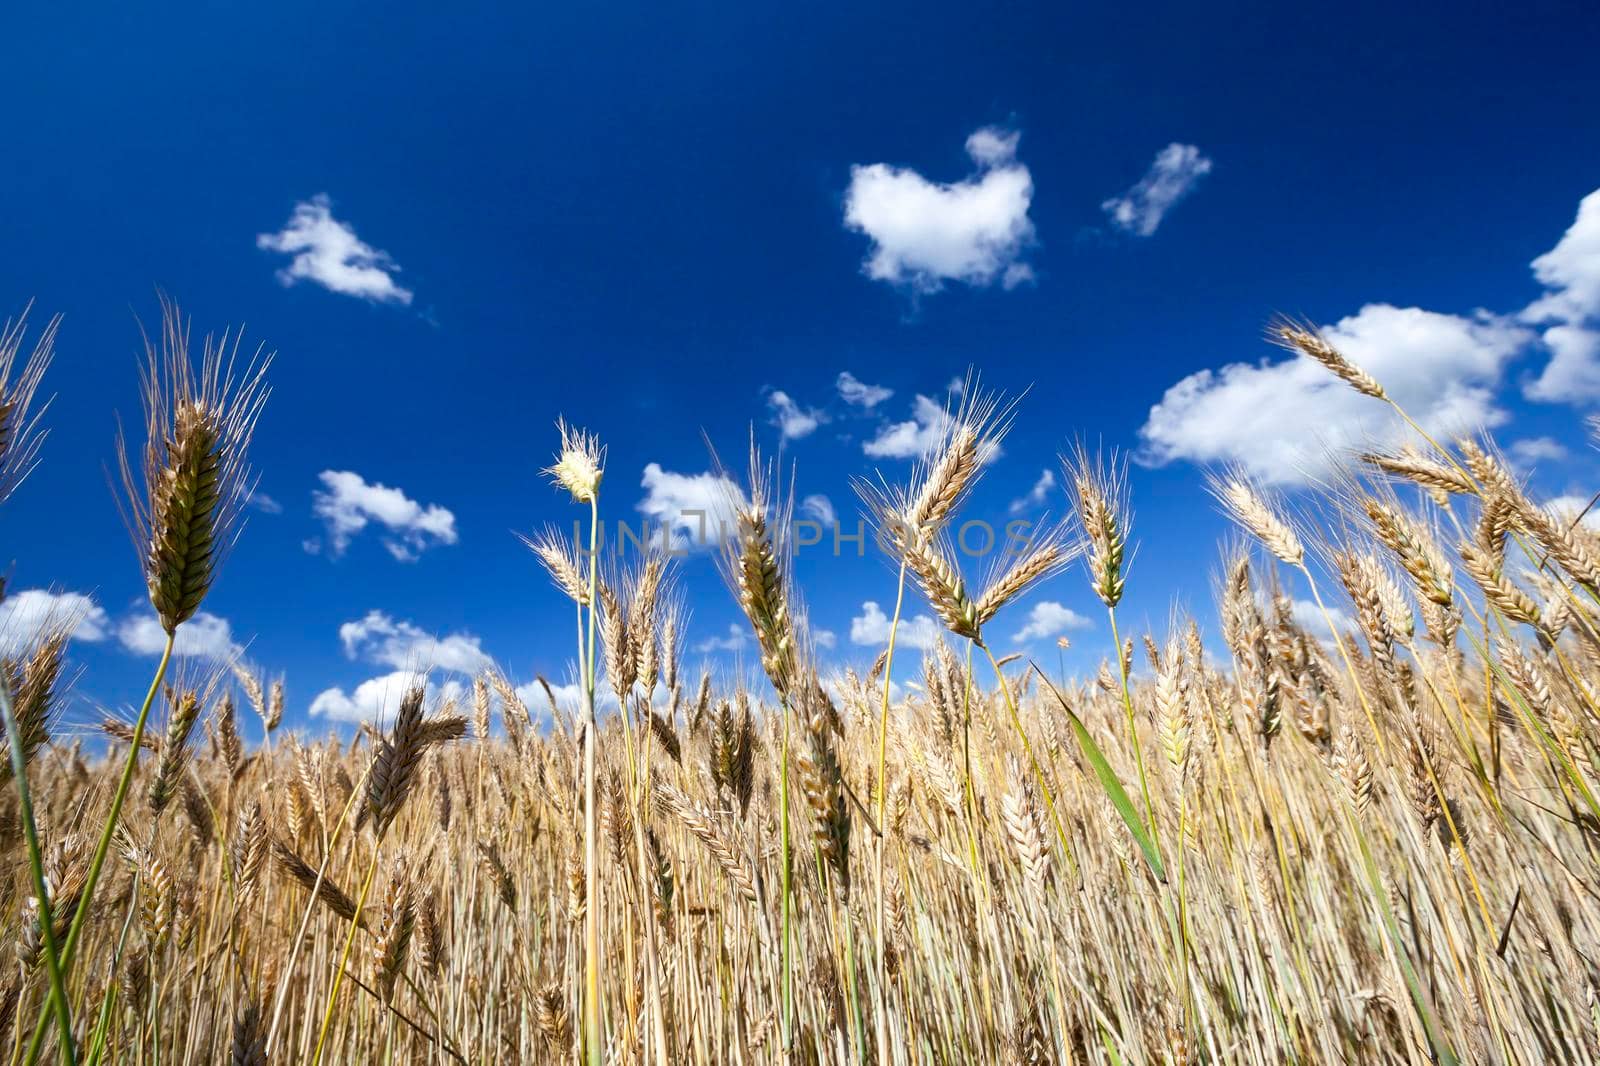 a ripe golden ears of wheat against a background of a saturated blue sky with snow-white clouds. photo spring close-up from the bottom